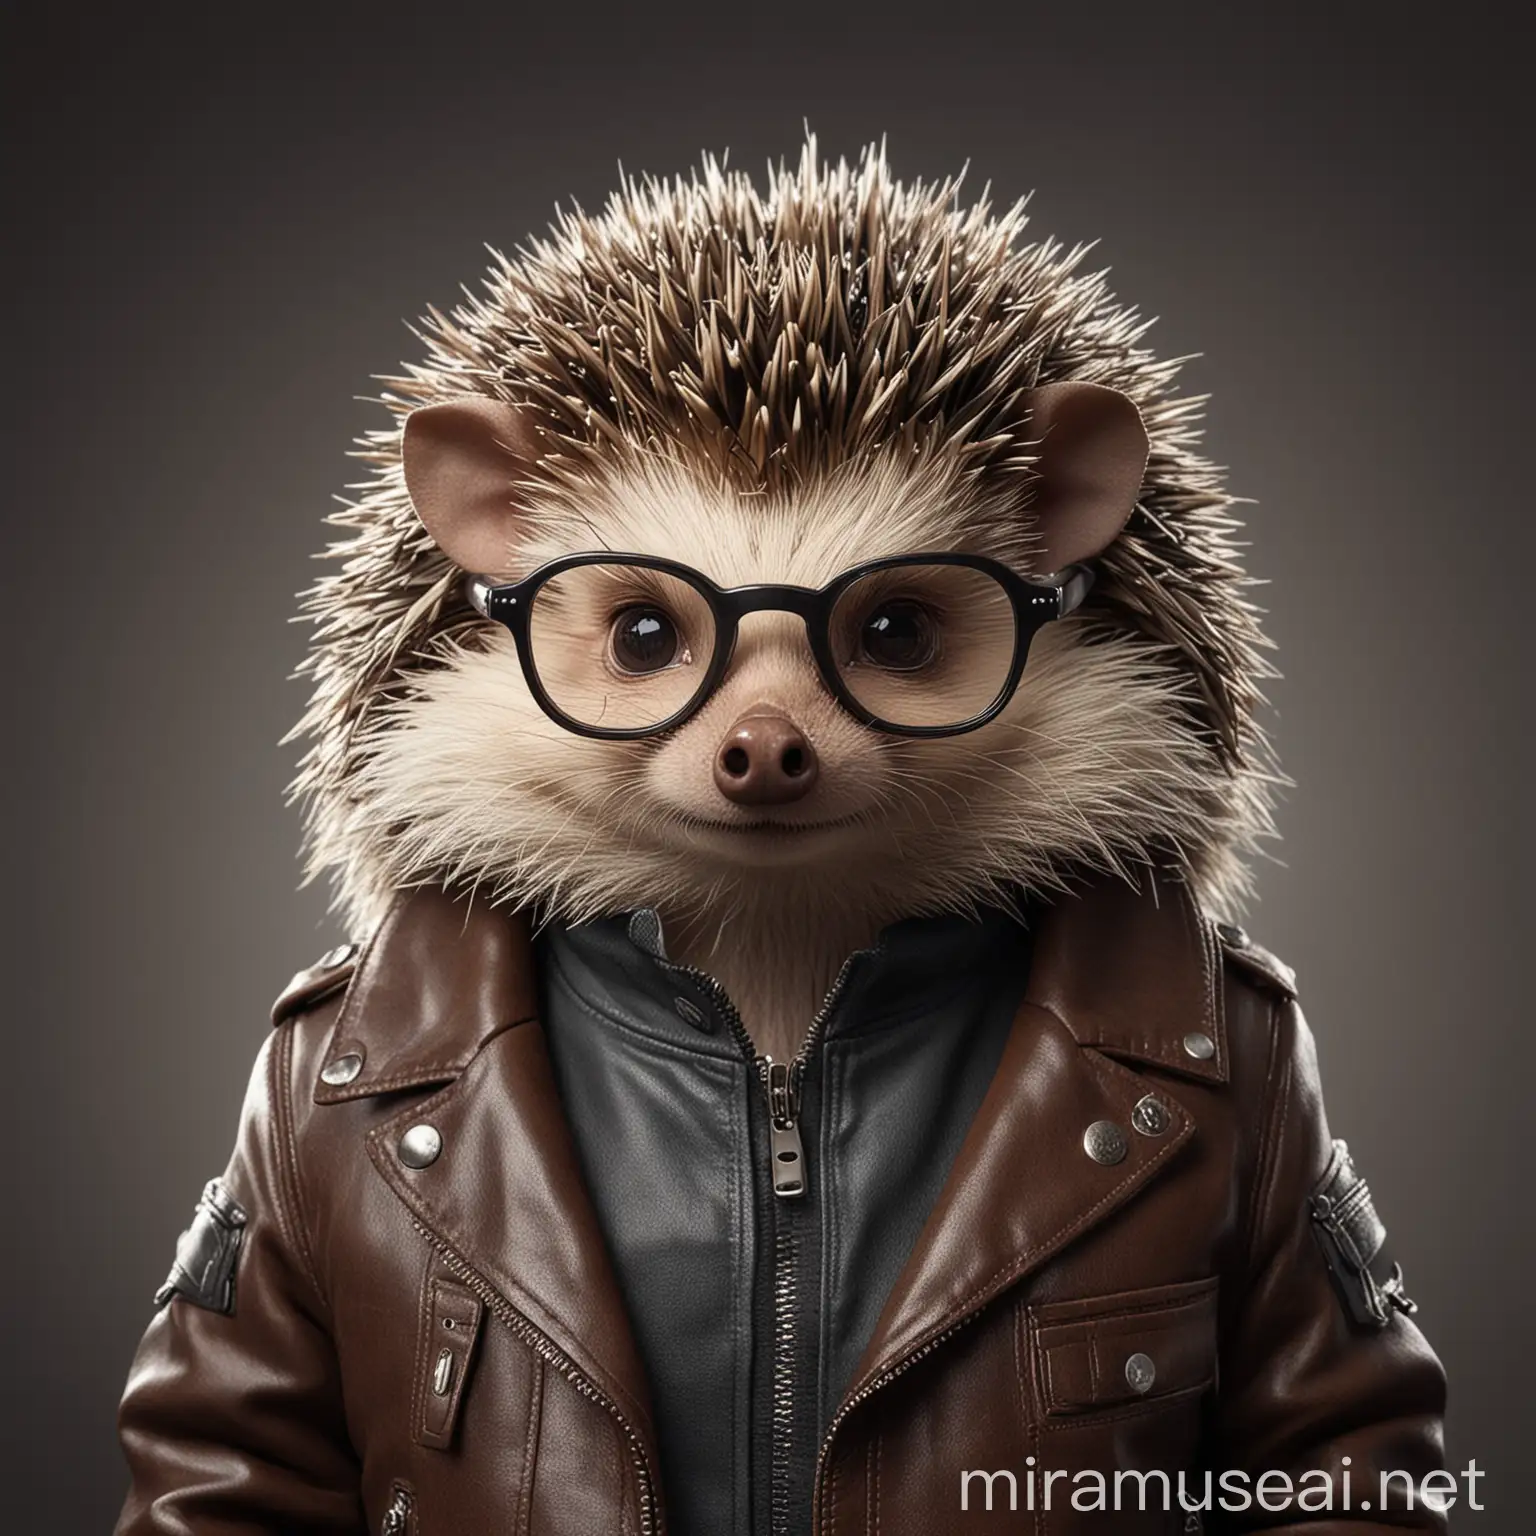 Cool Hedgehog Wearing Glasses and Leather Jacket